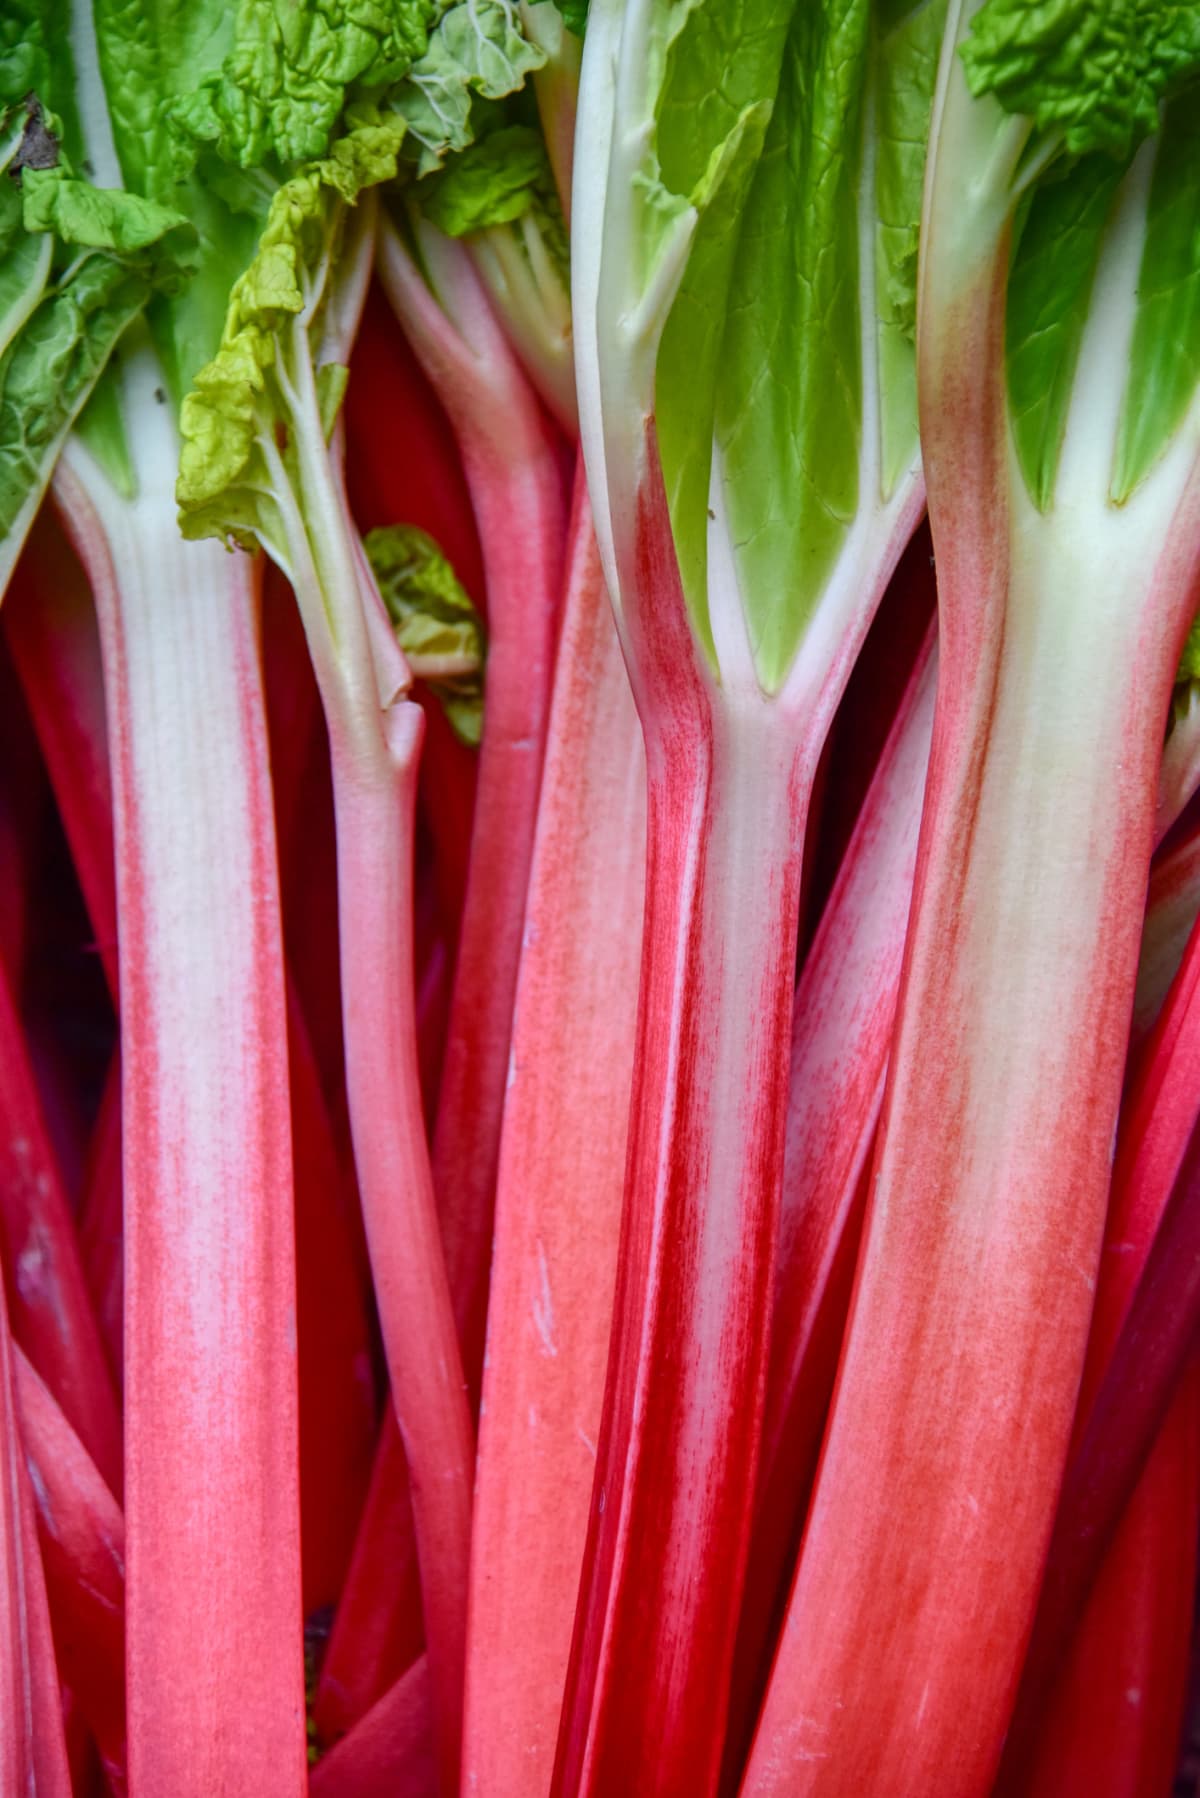 A pile of freshly picked rhubarb with strong red and green stalks